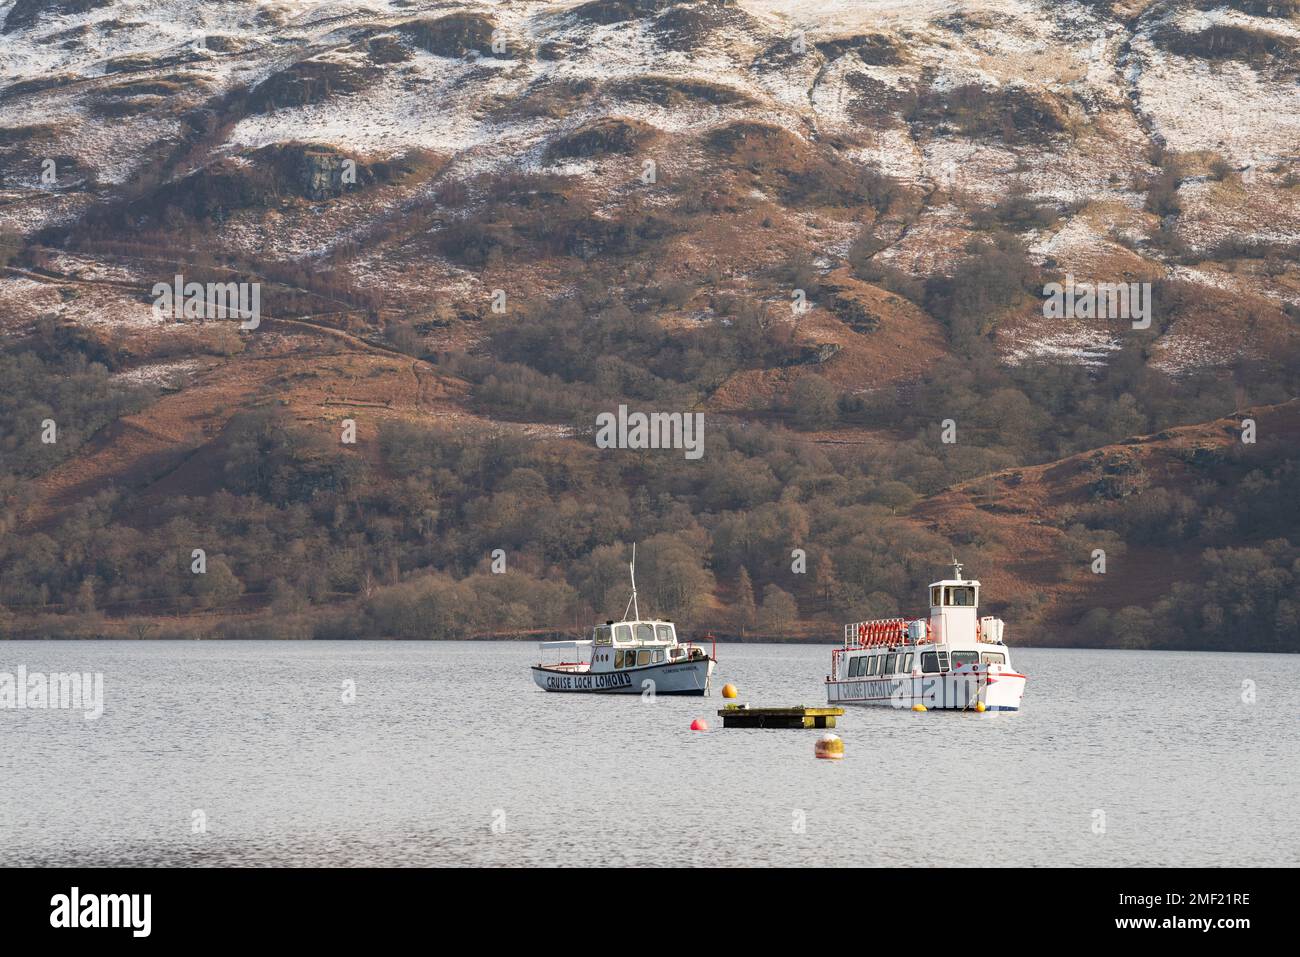 Two Loch Lomond Cruiser boats on lake with snow covered mountains in background. Stock Photo